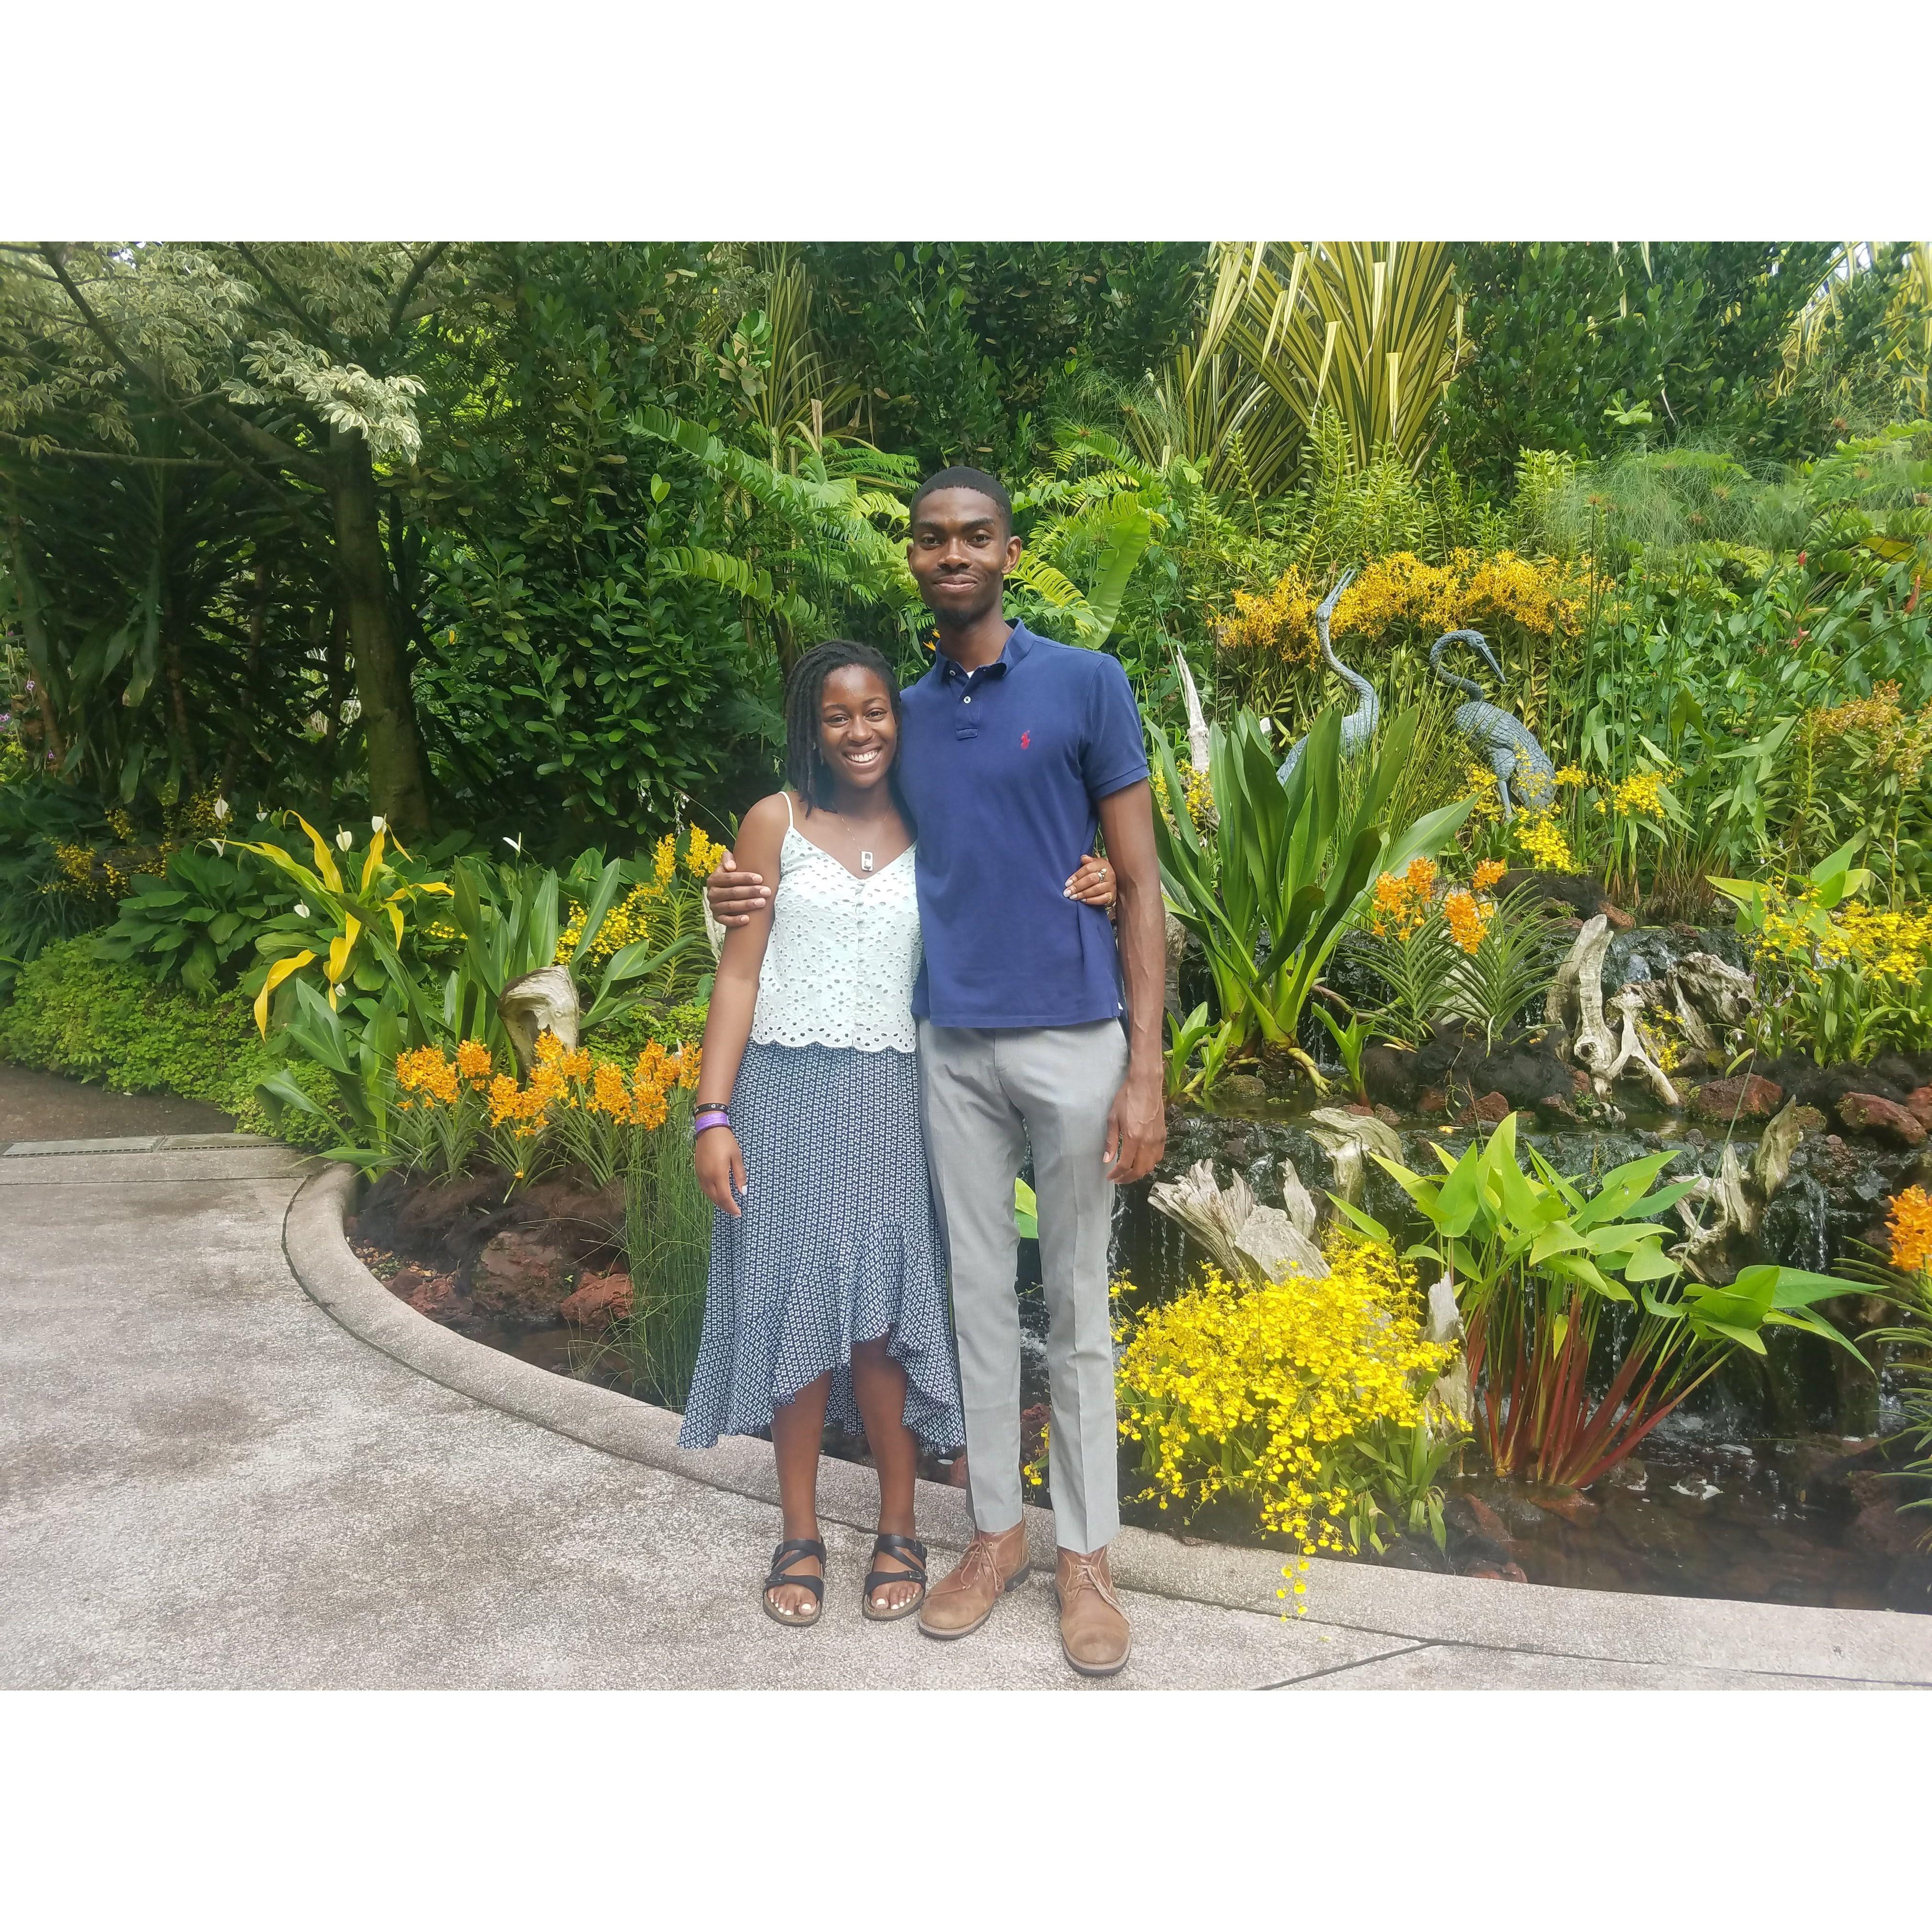 Singapore Botanical Gardens (pt. 2 of our first date)